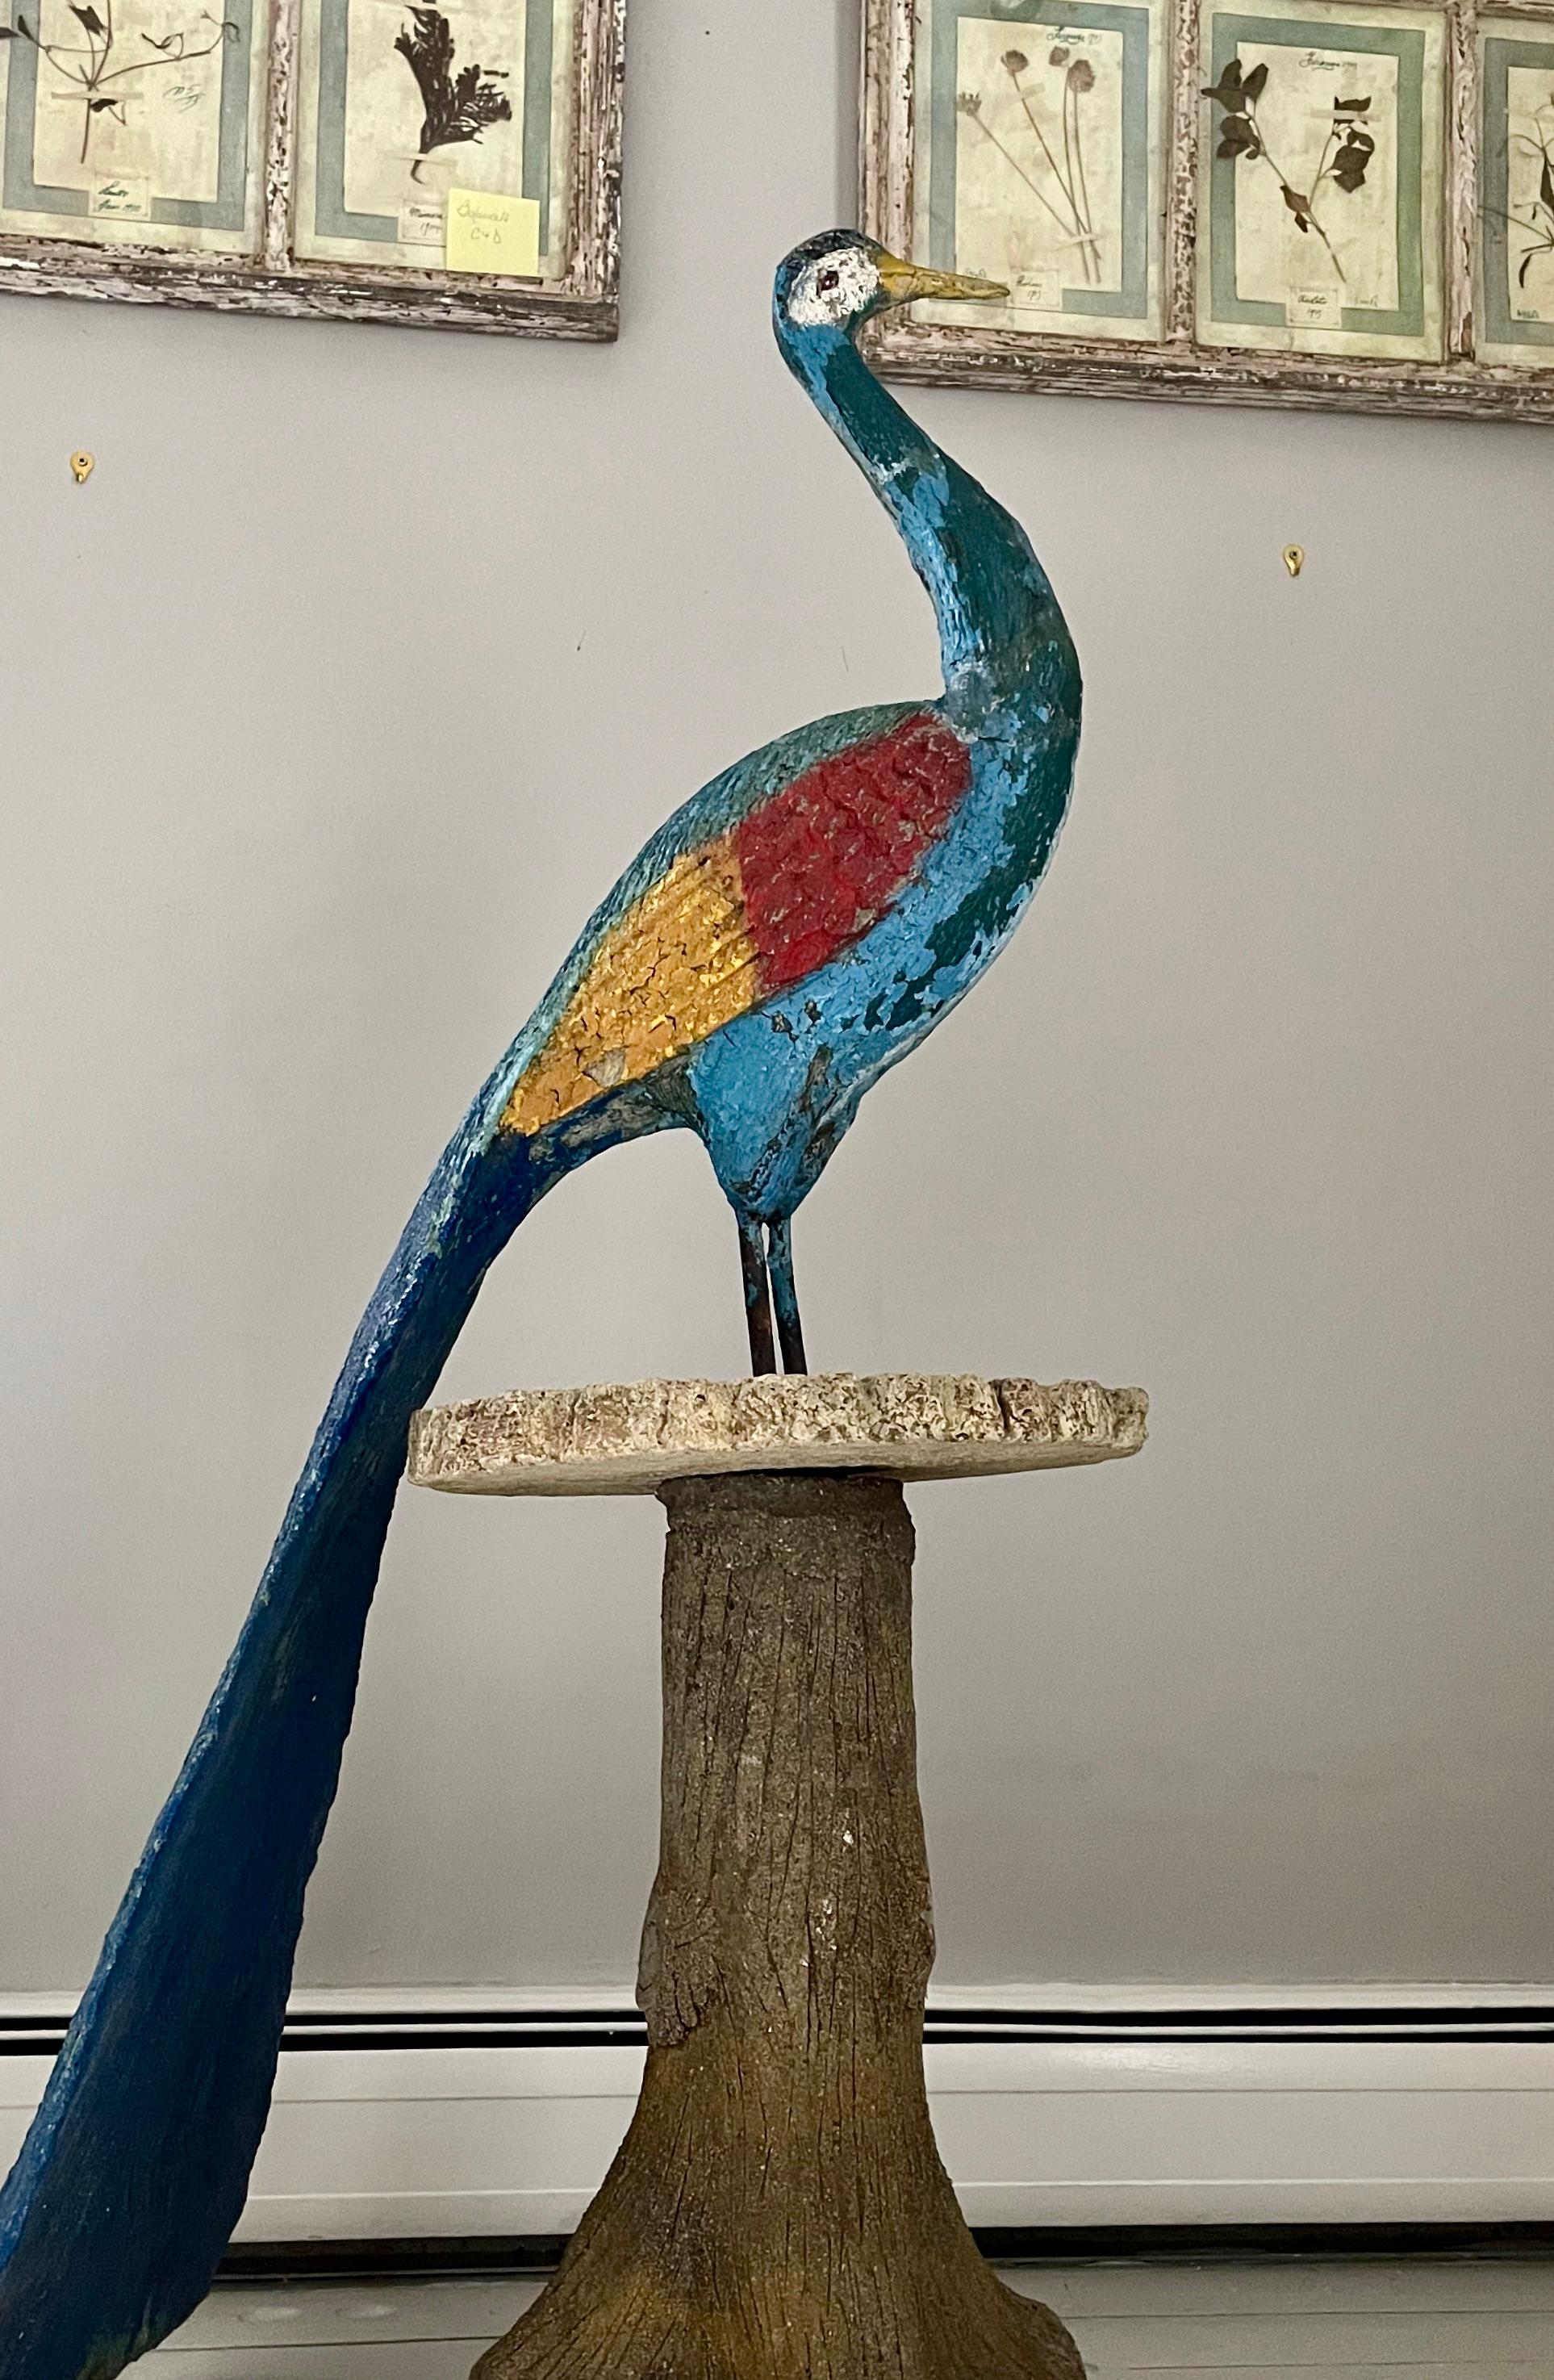 We are long-time fans of French Art Populaire animal statues made in the 1930s to 1950s but we have never seen a peacock, let alone one on a faux bois table! Sadly his neck was broken in transport but we have finally had him restored and our guy did